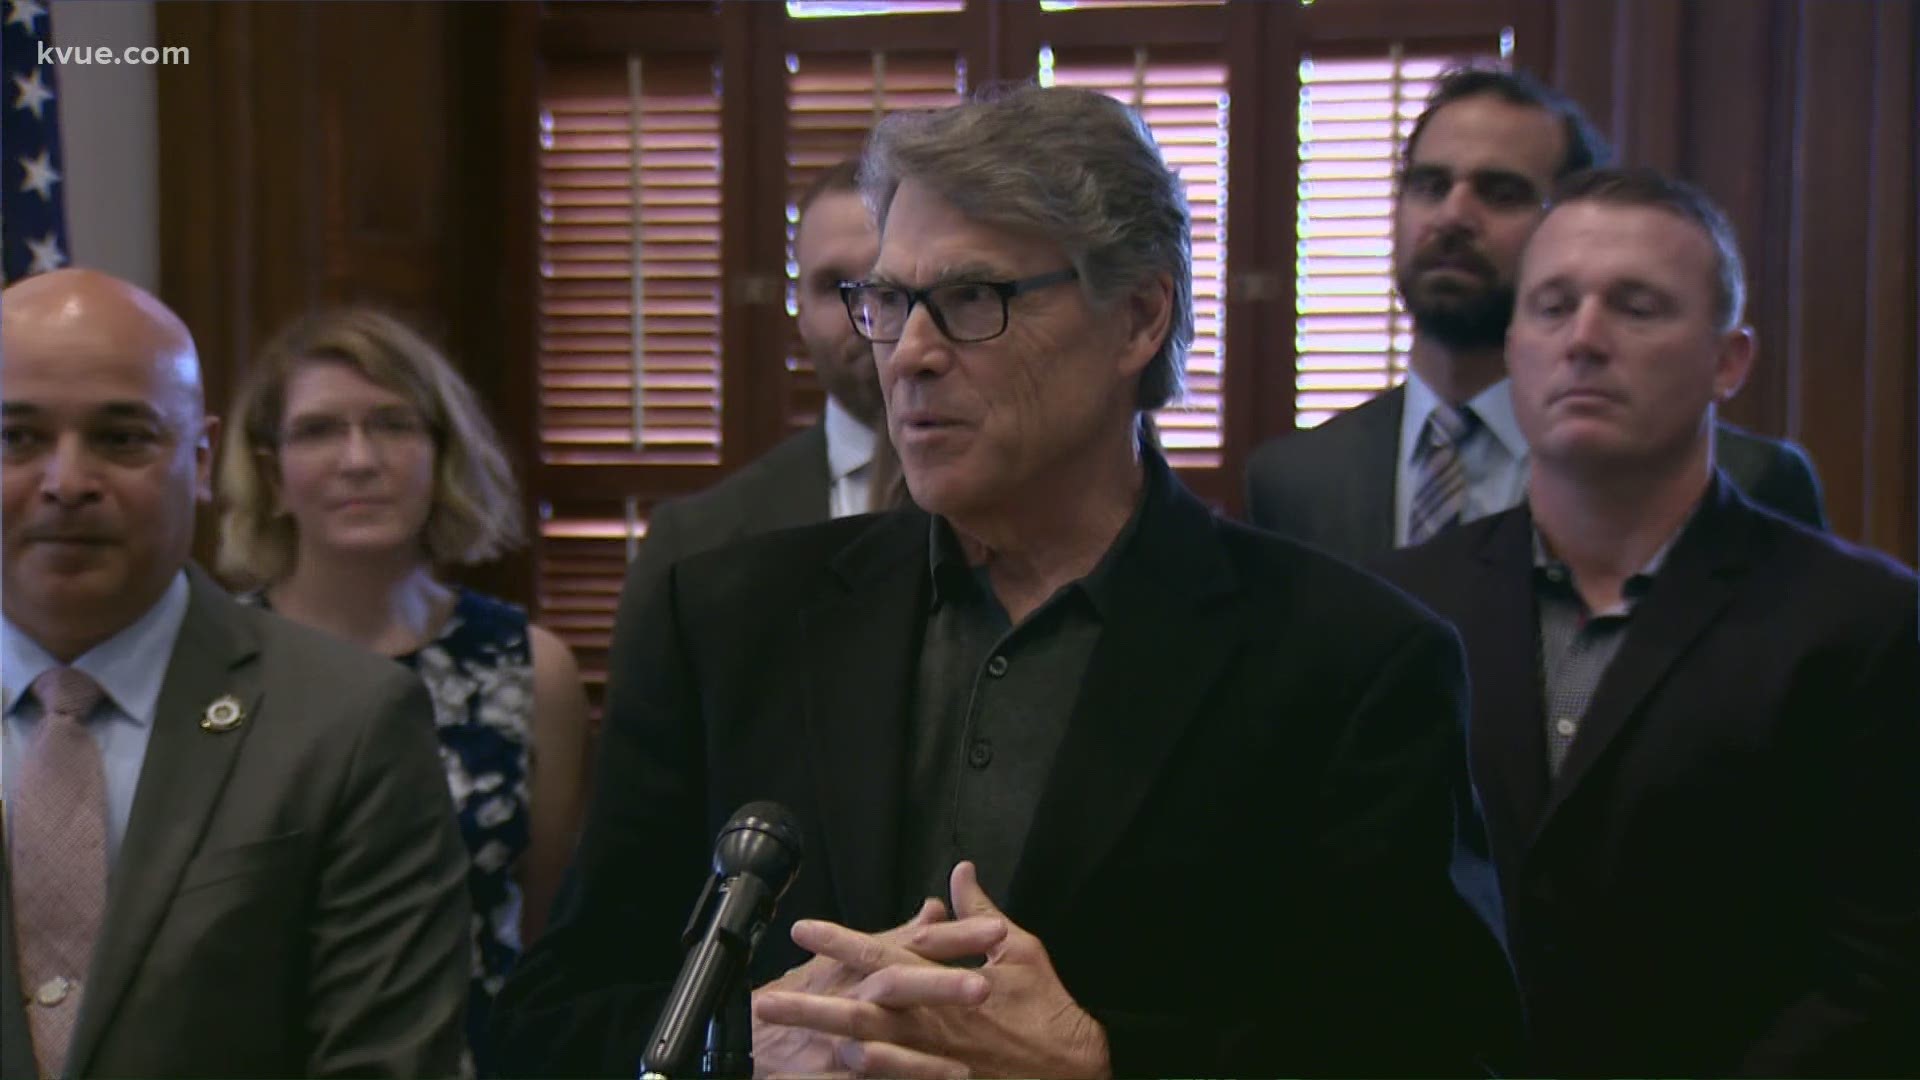 Rick Perry spoke at the Texas Capitol on Wednesday in support of the bill.